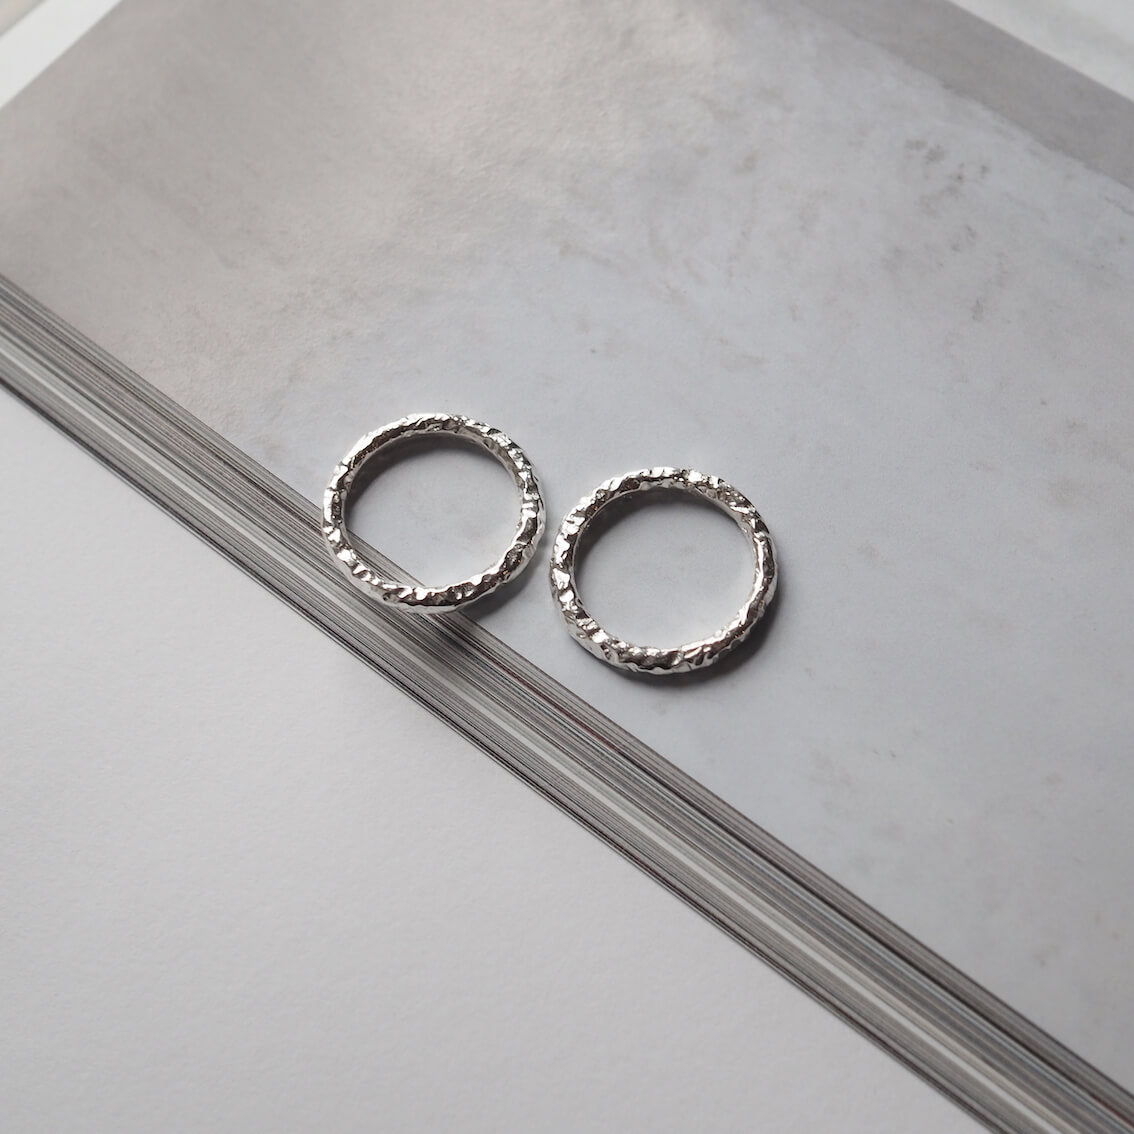 Two silver textured rings on magazine